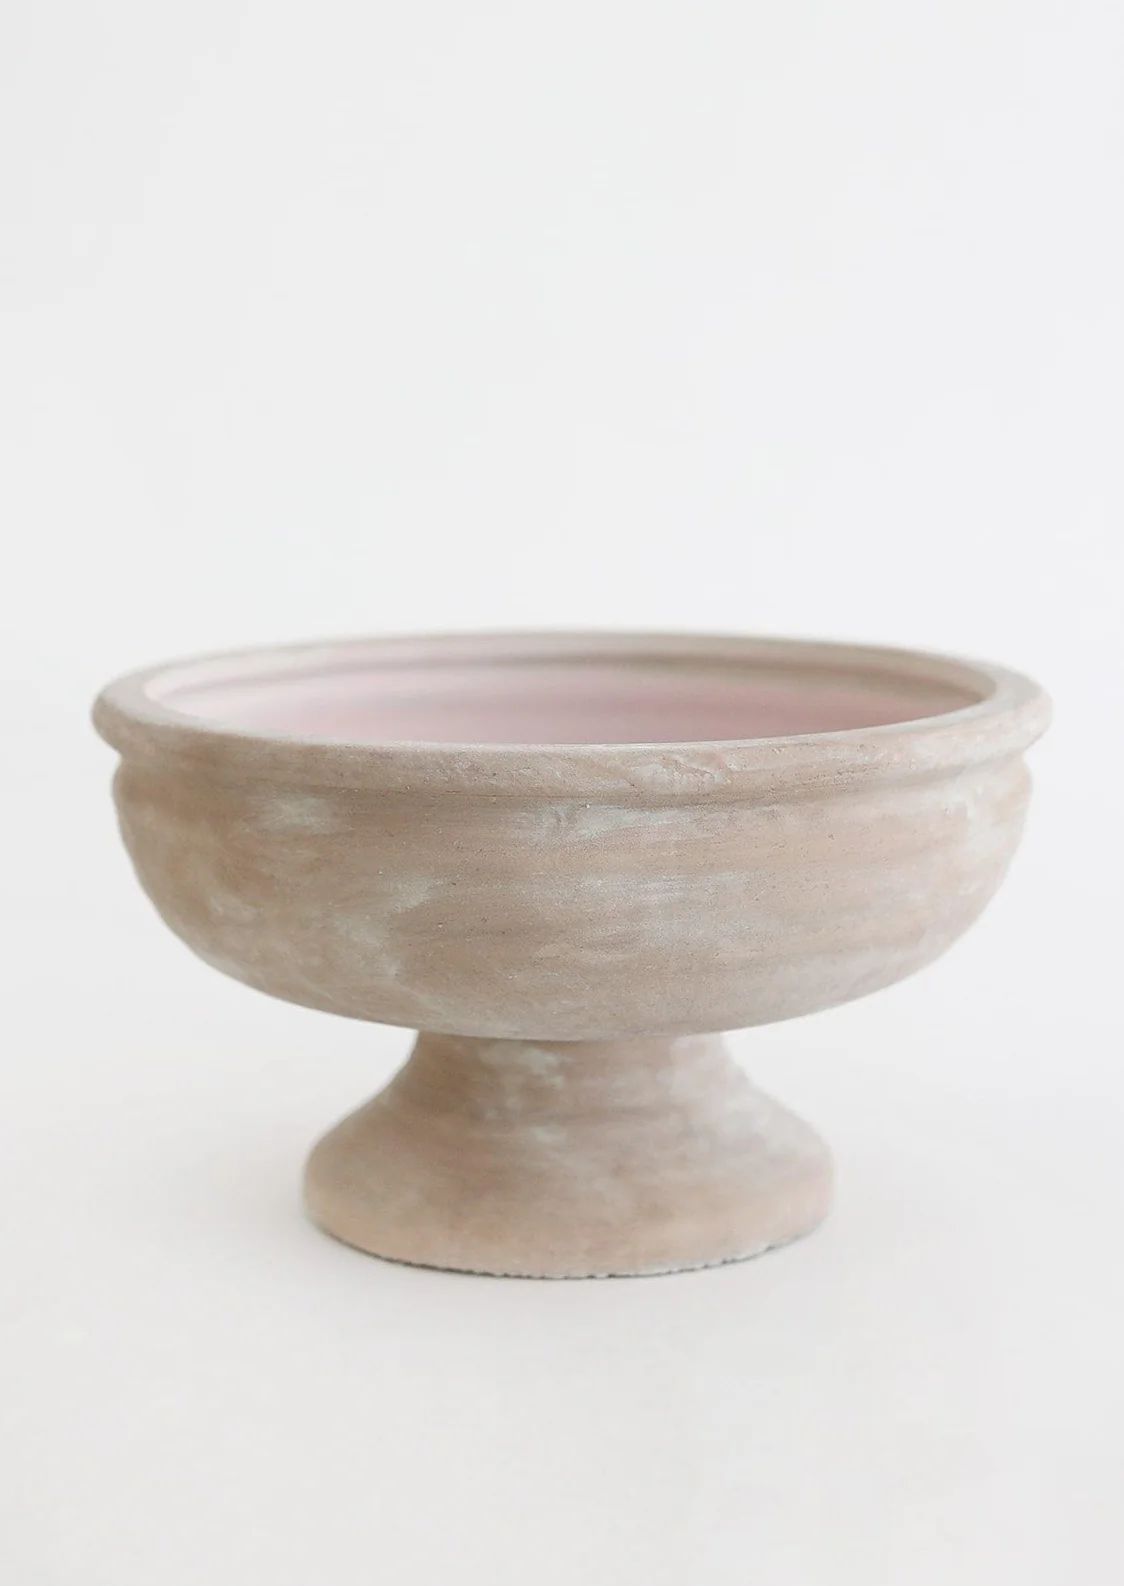 Earthy Mauve Ceramic Compote Bowl - 10.25" Wide | Afloral